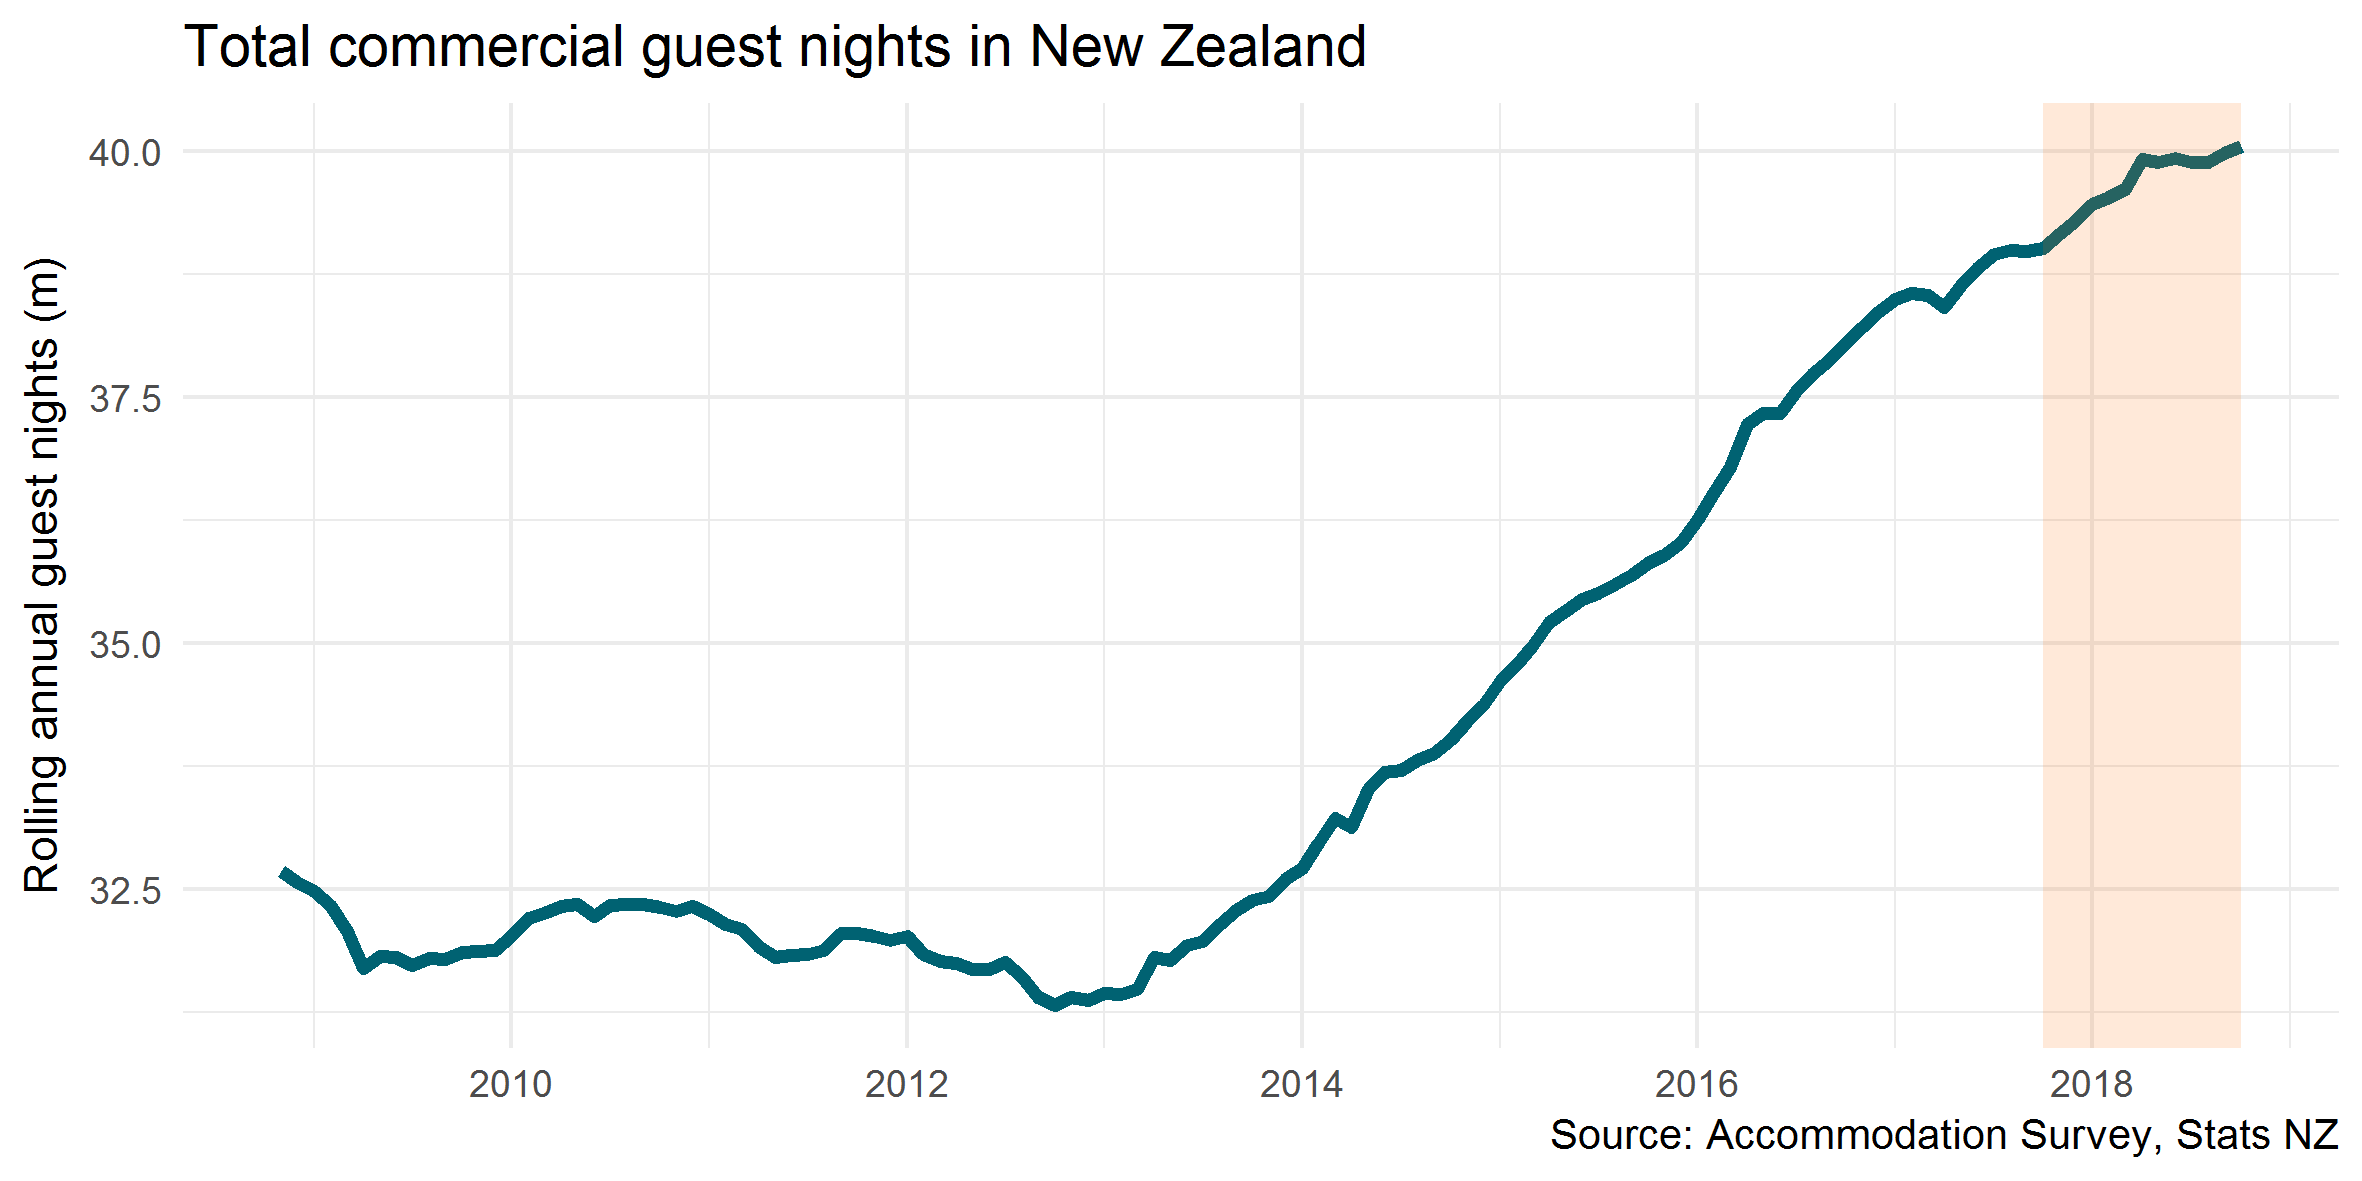 Total commercial guest nights in New Zealand